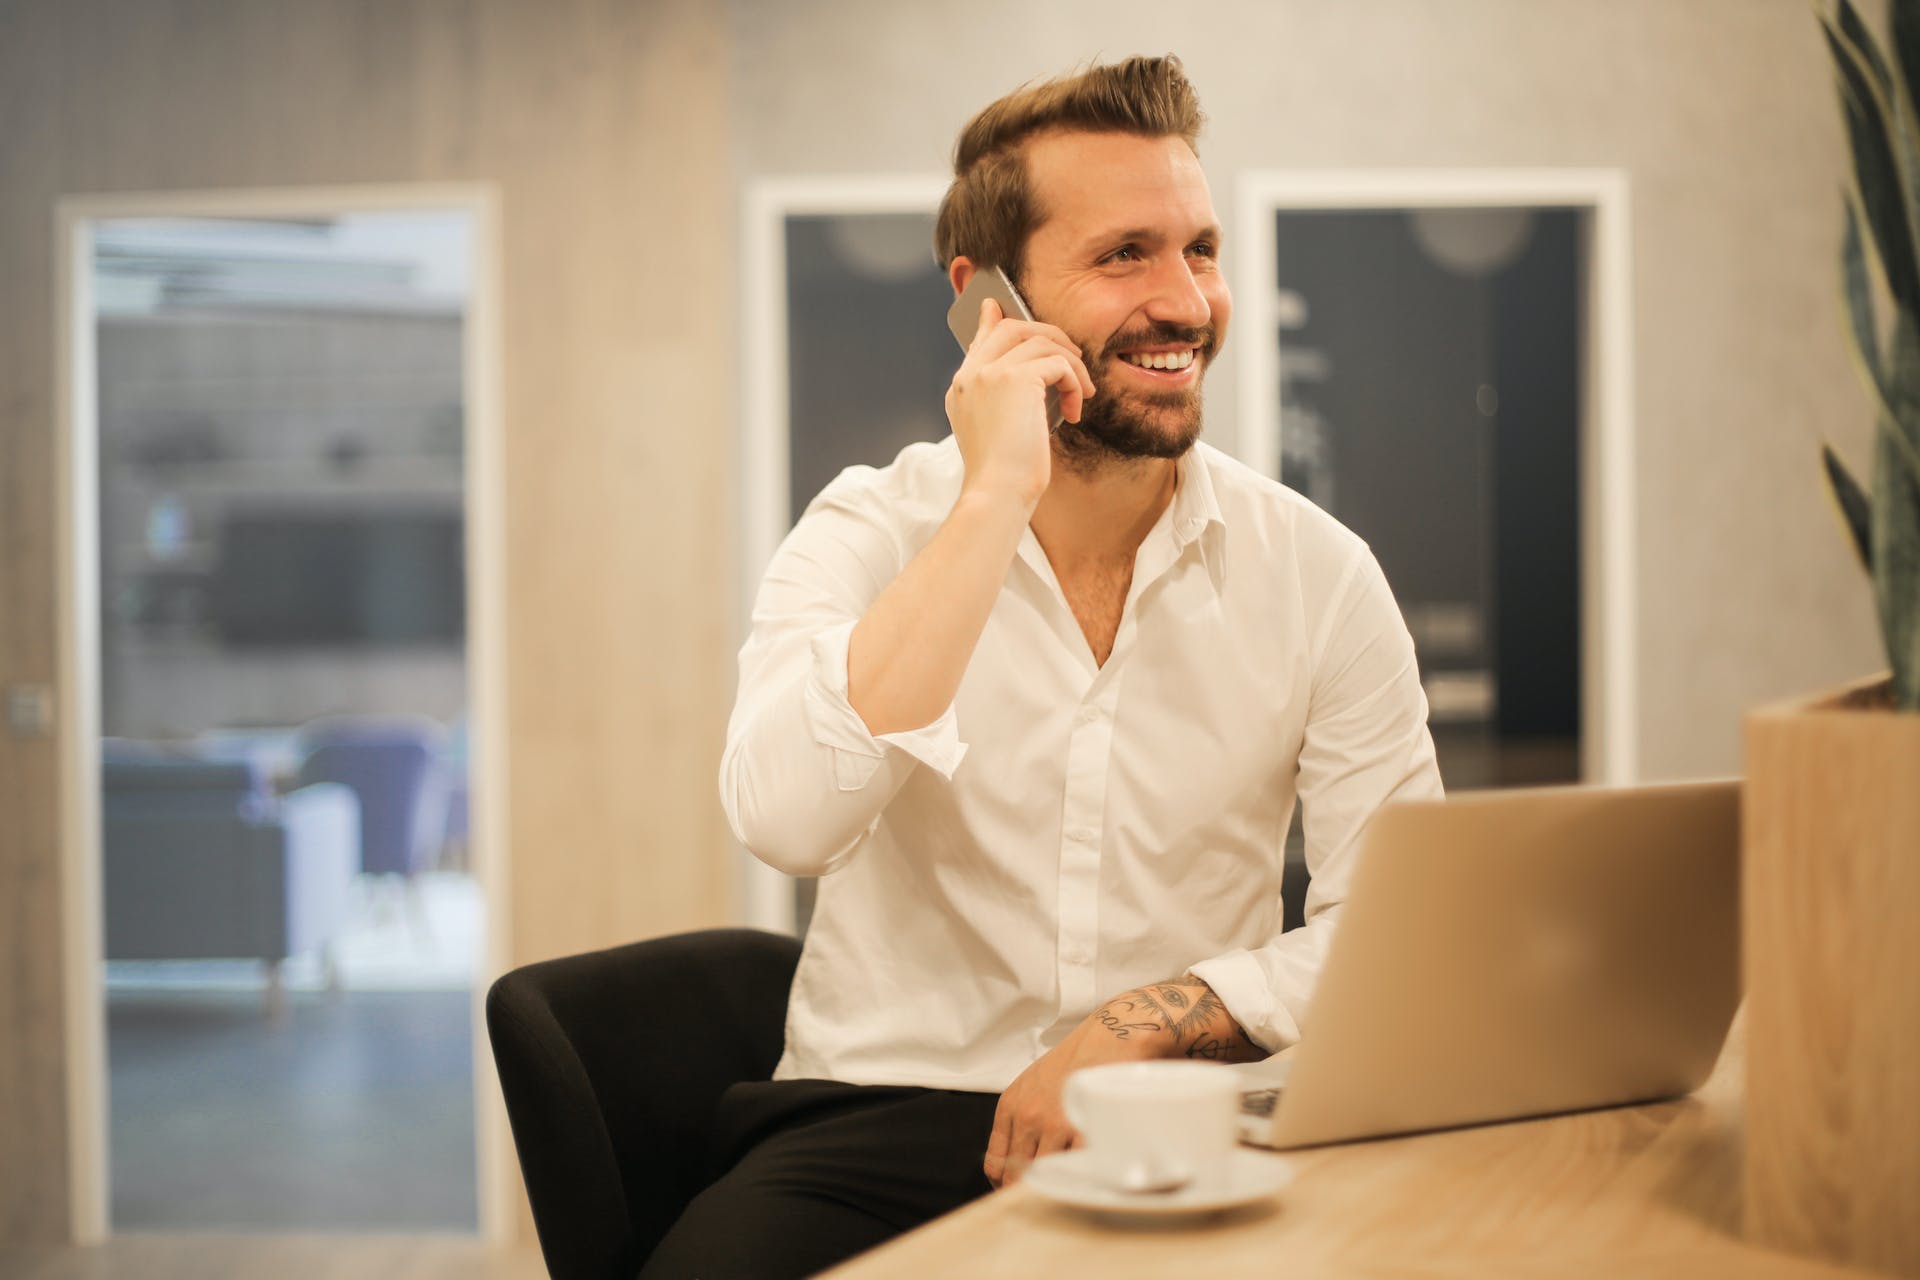 A man talking on a phone call in an office | Source: Pexels